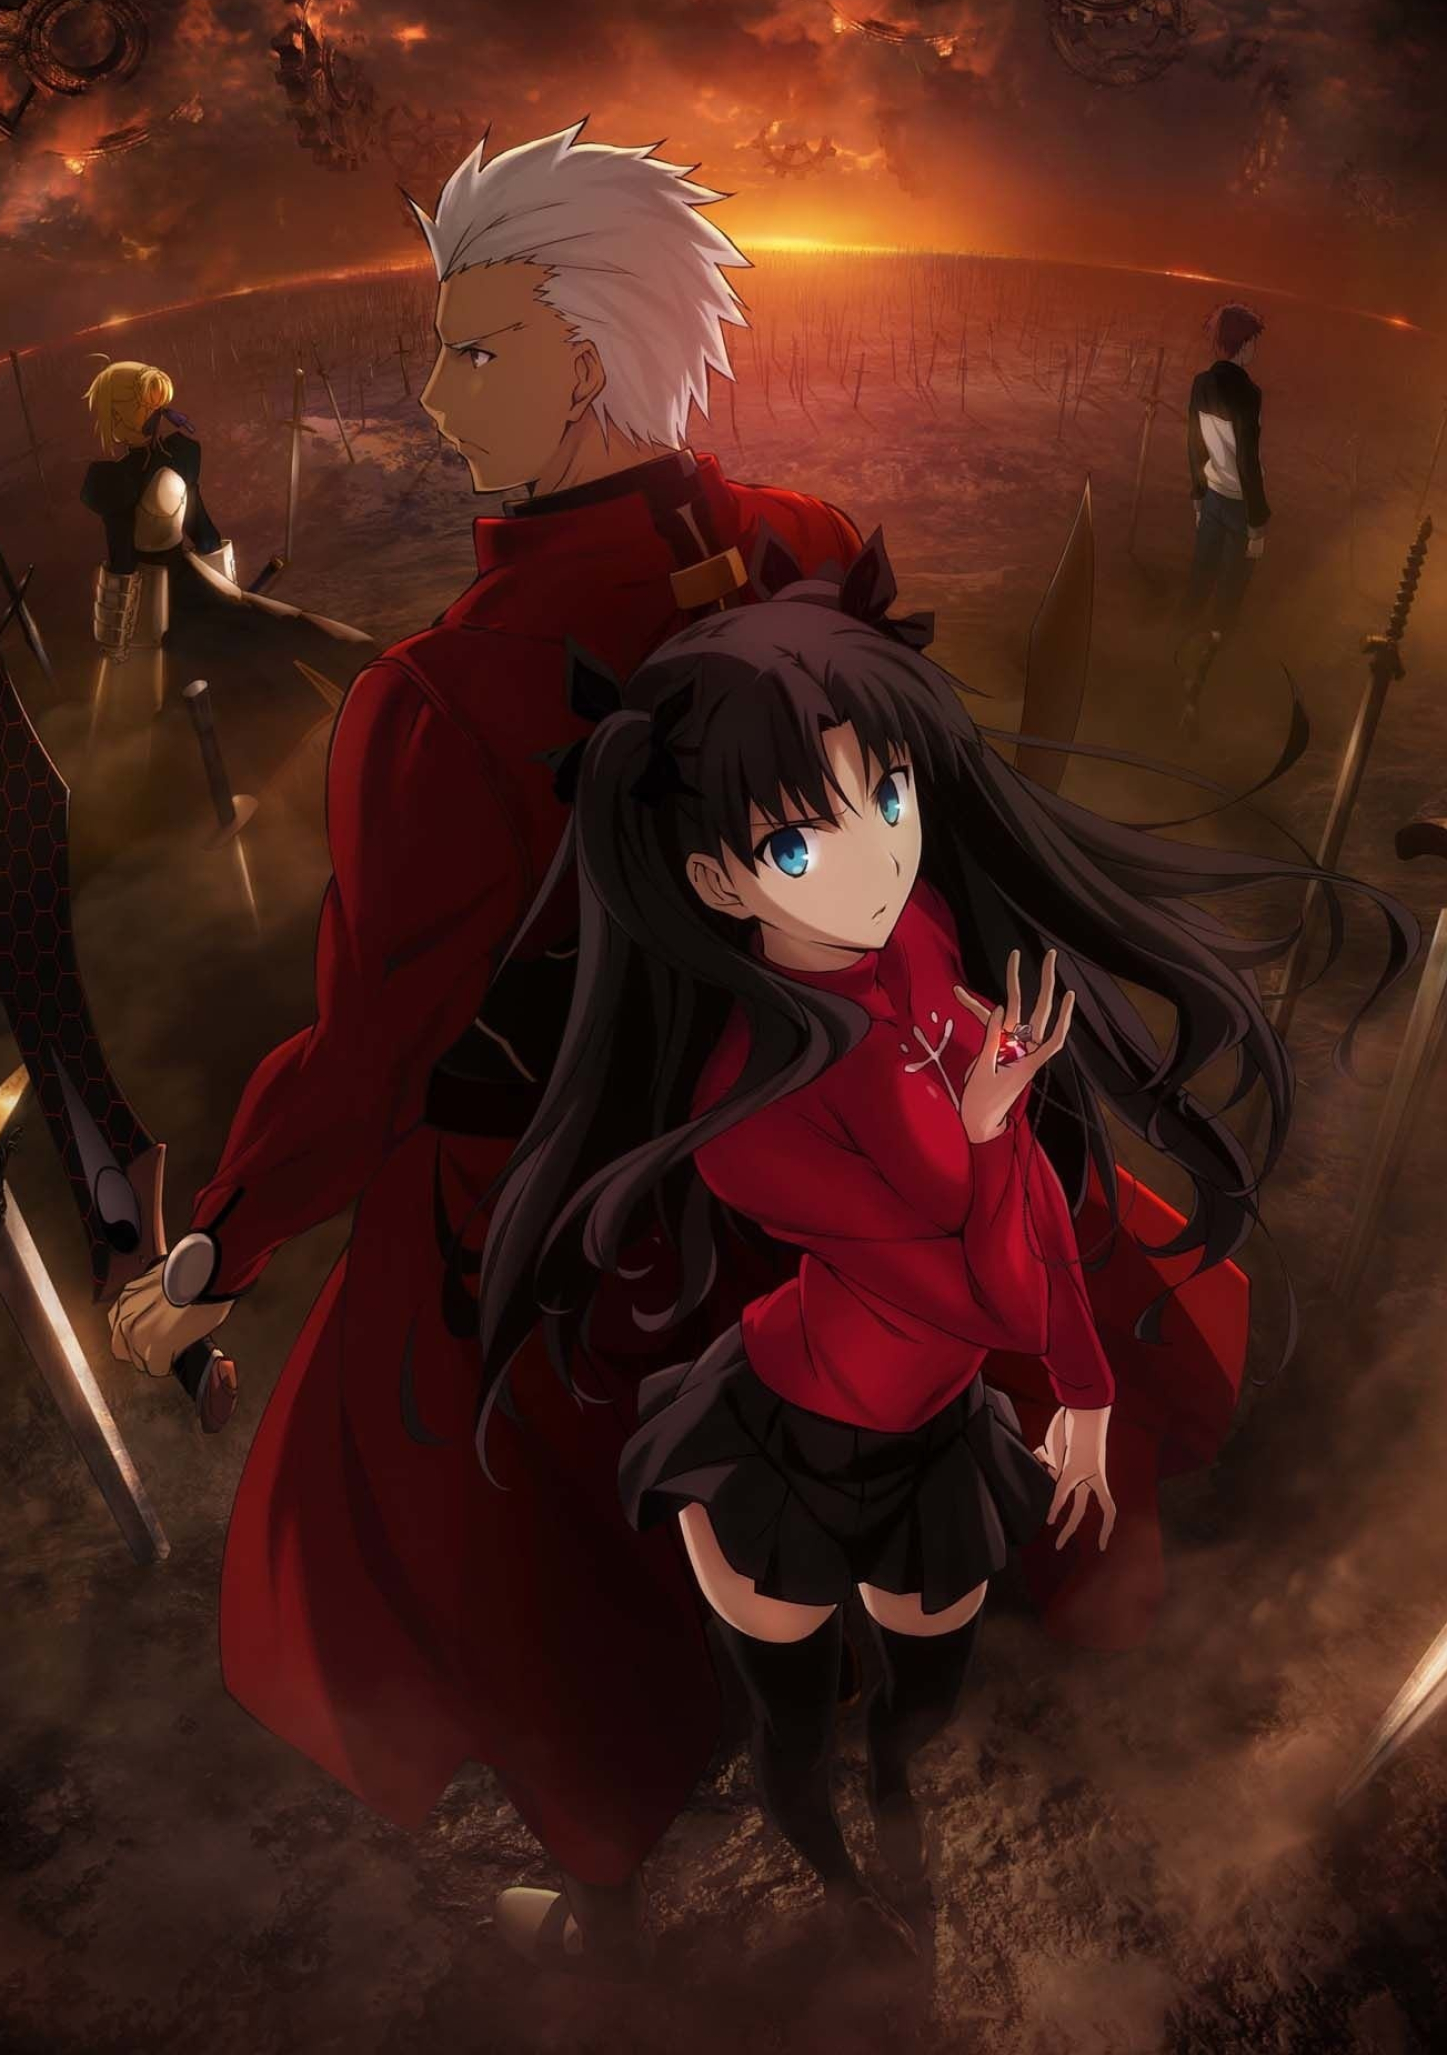 Fate/stay night, Anime news network, Unlimited Blade Works, Latest updates, 1450x2060 HD Phone